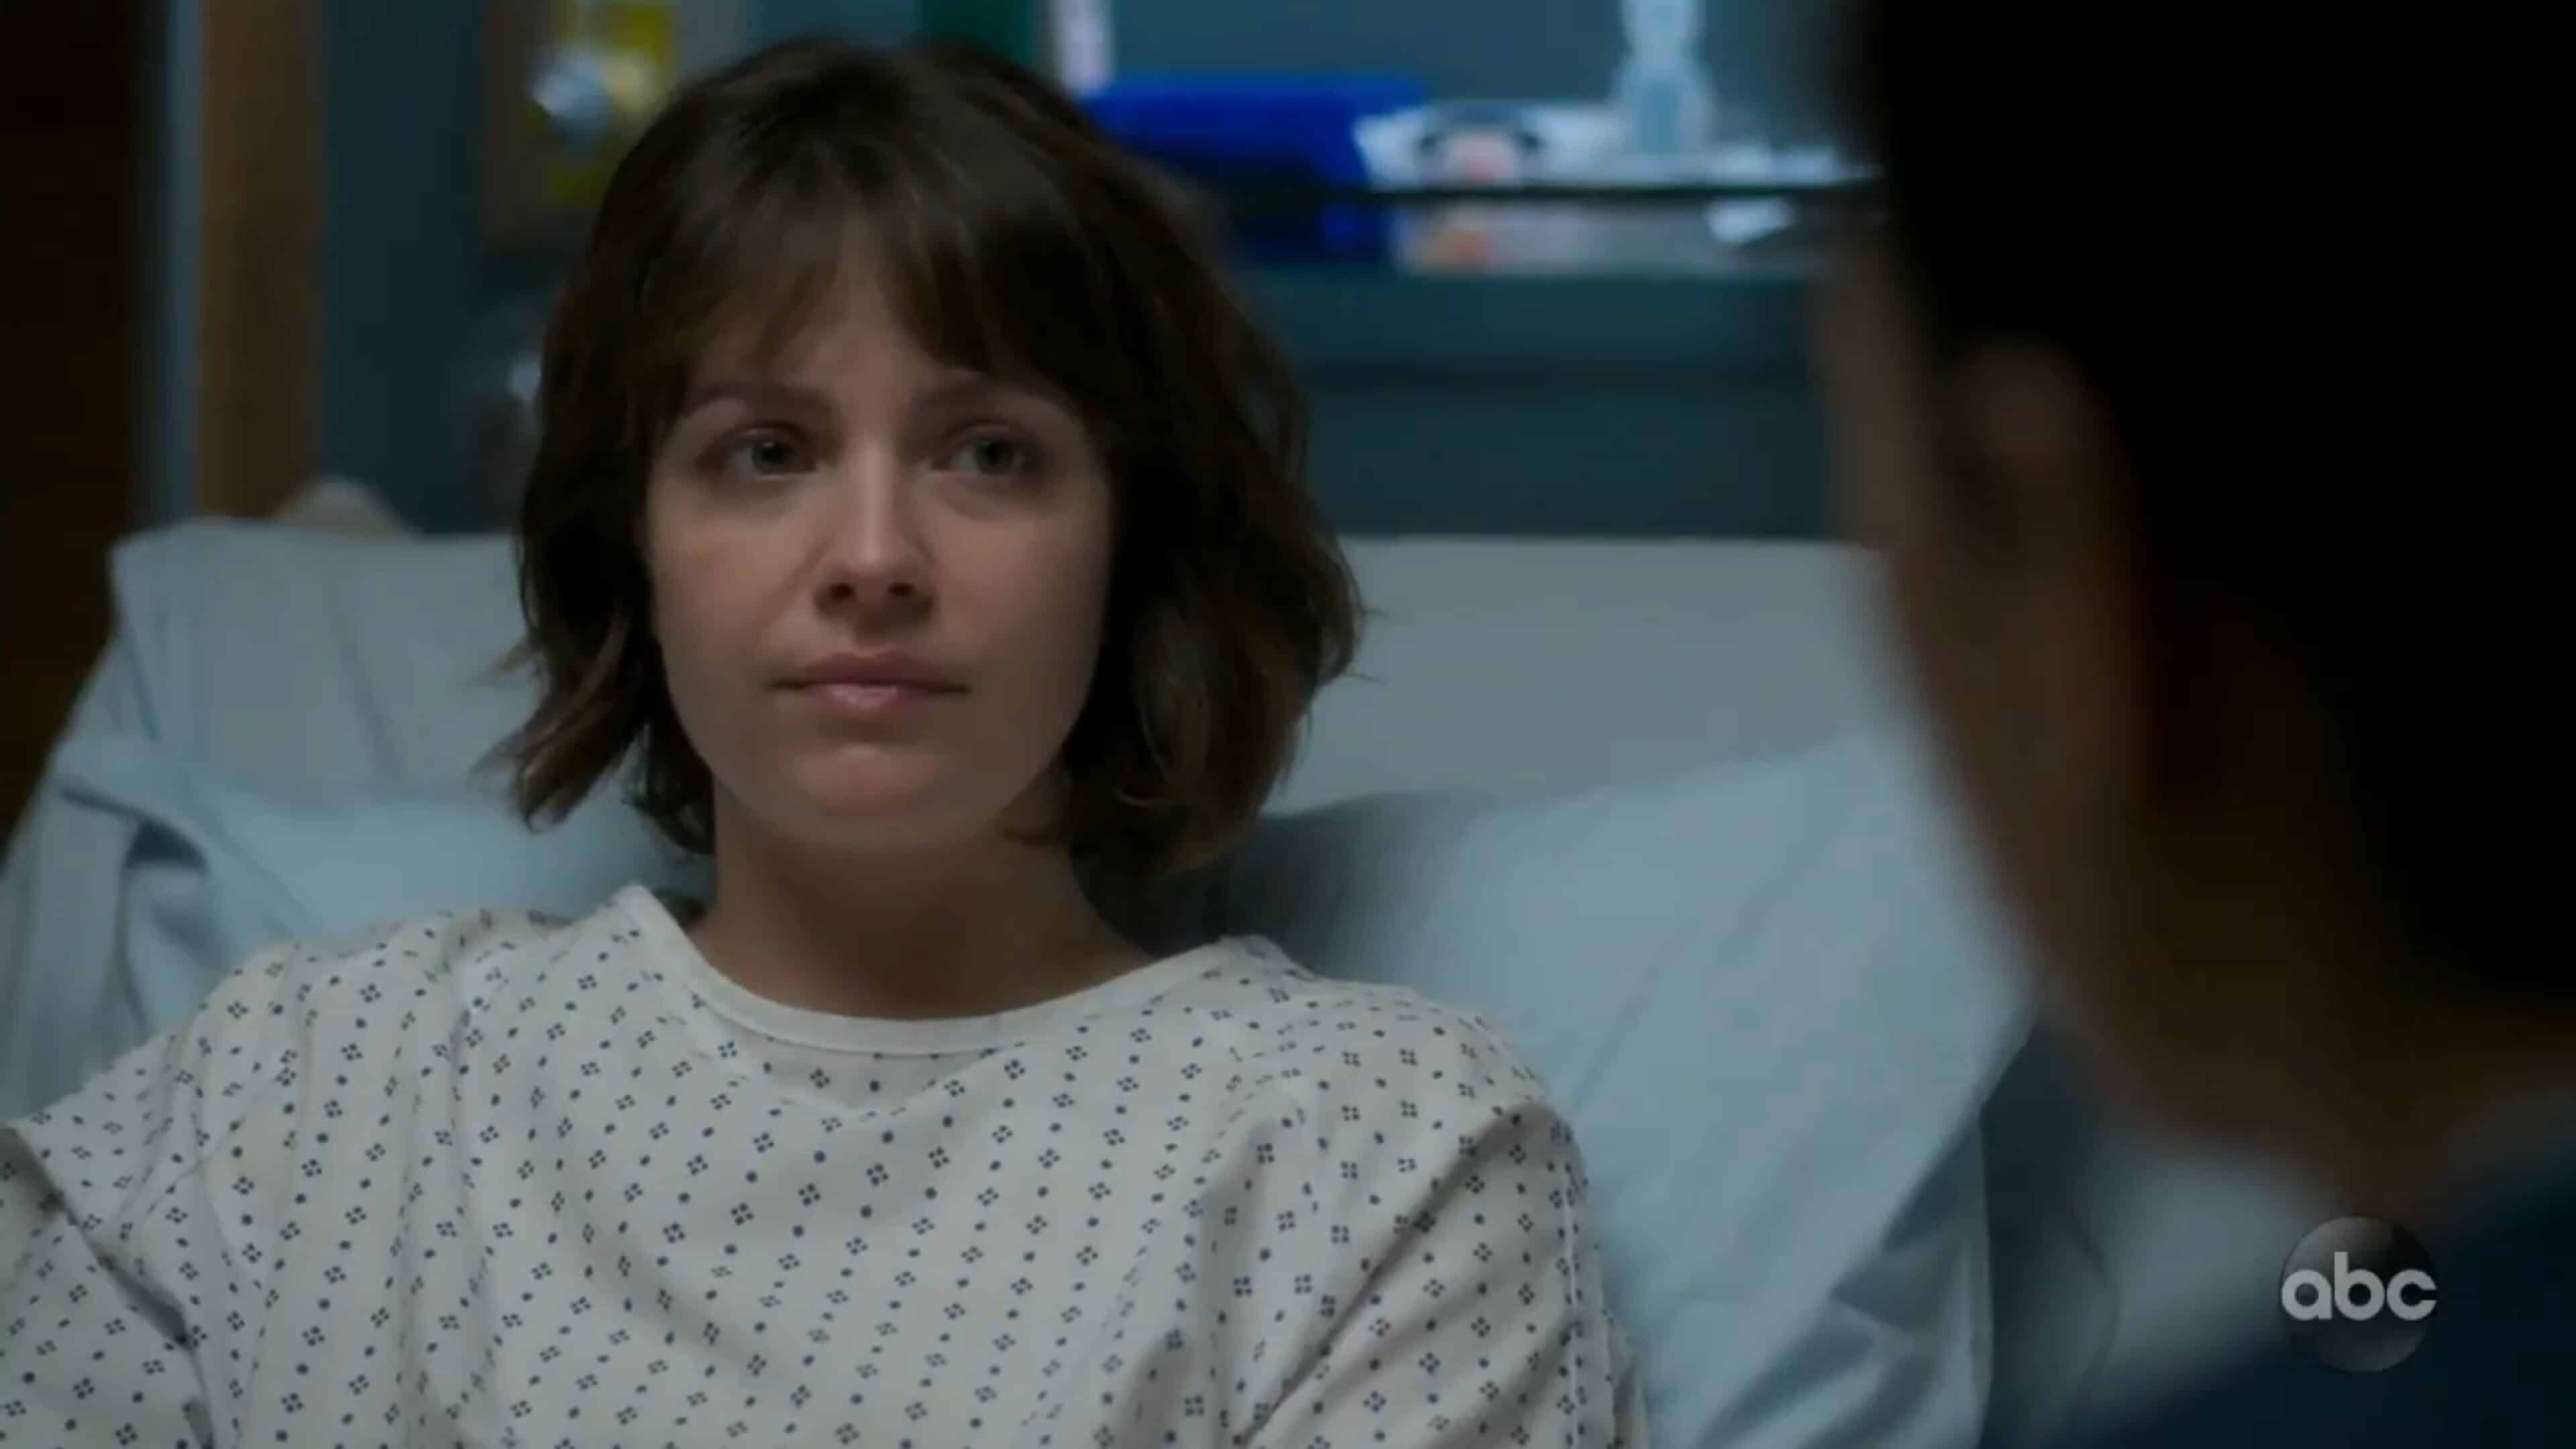 Lea in a hospital bed